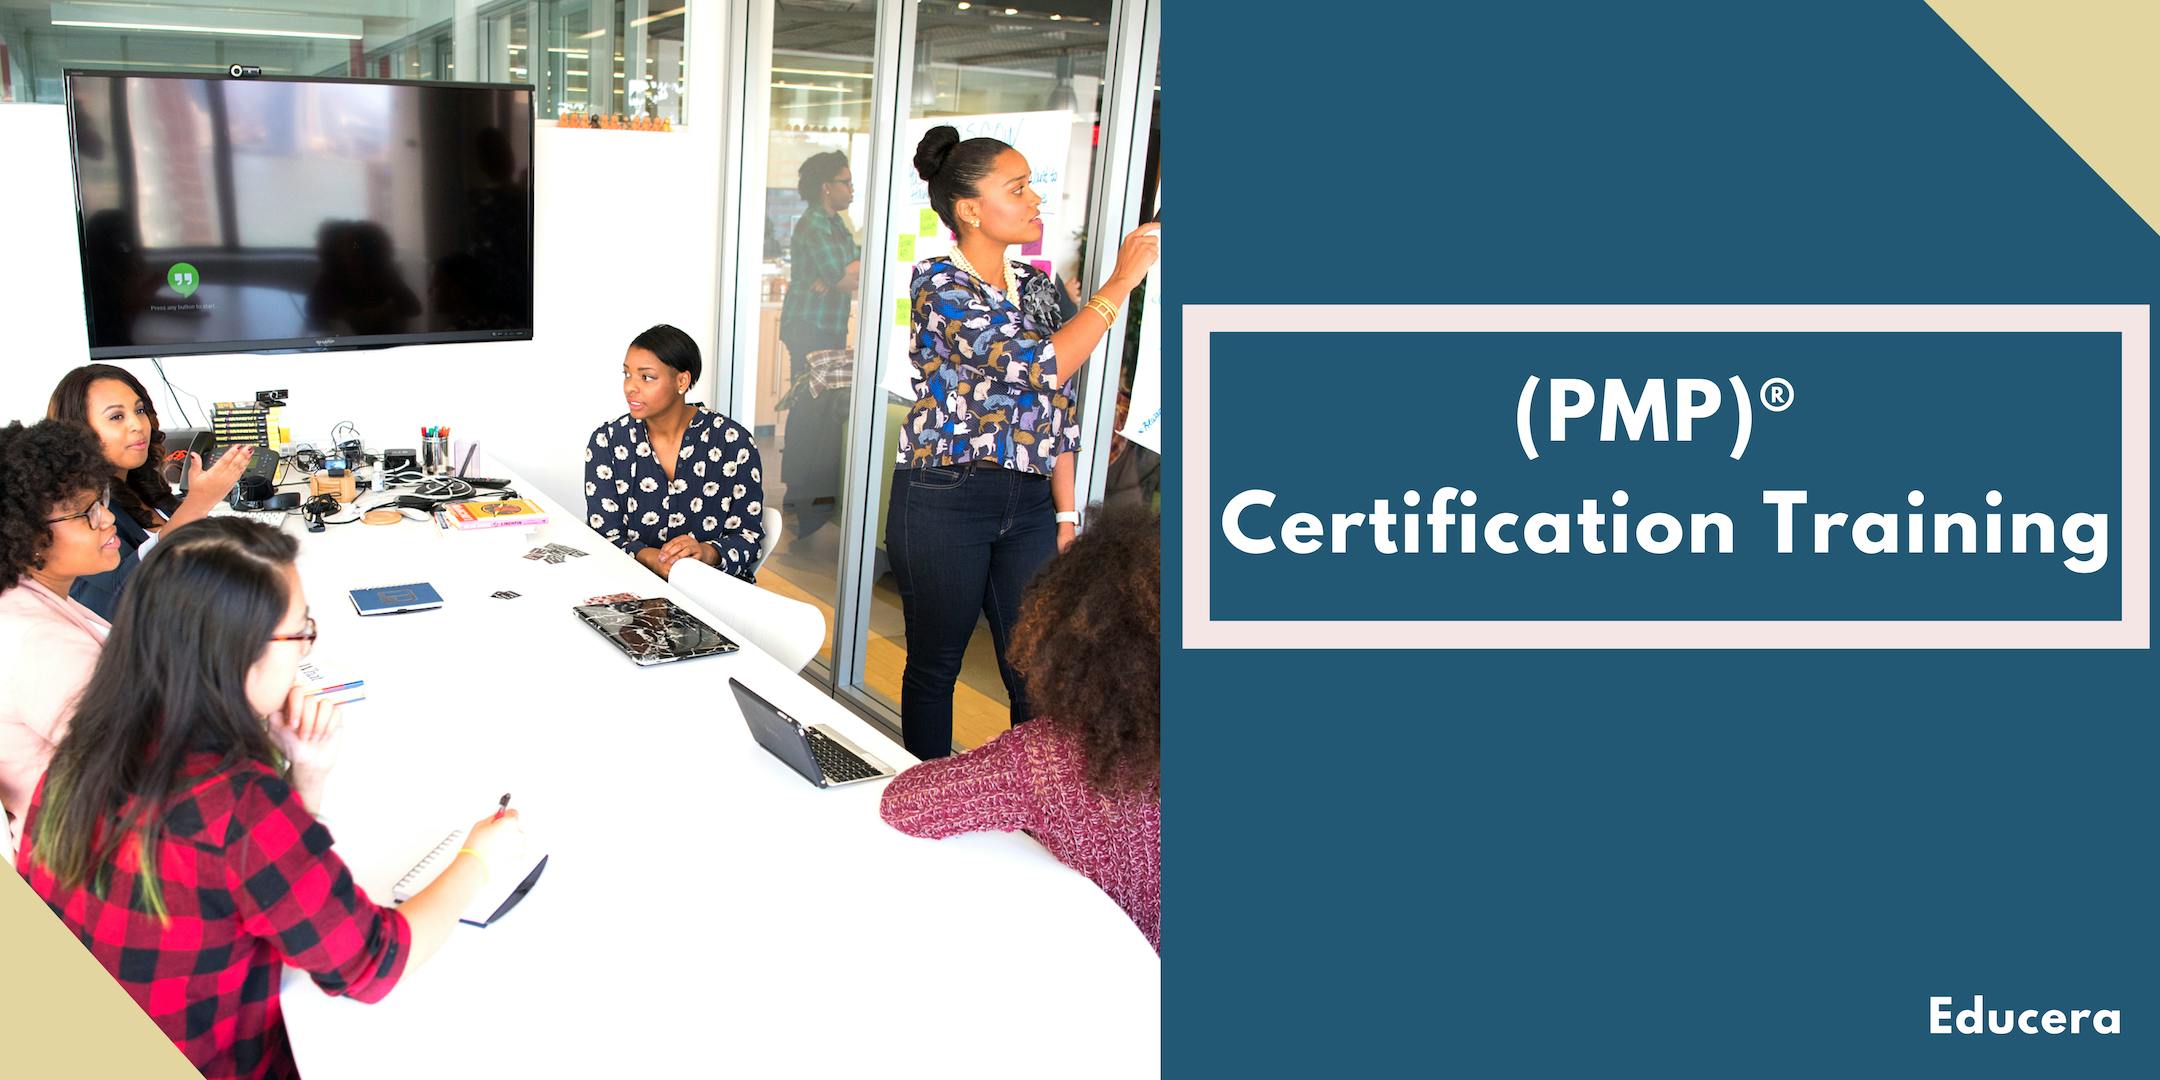  PMP Certification Training in Greater Los Angeles Area, CA